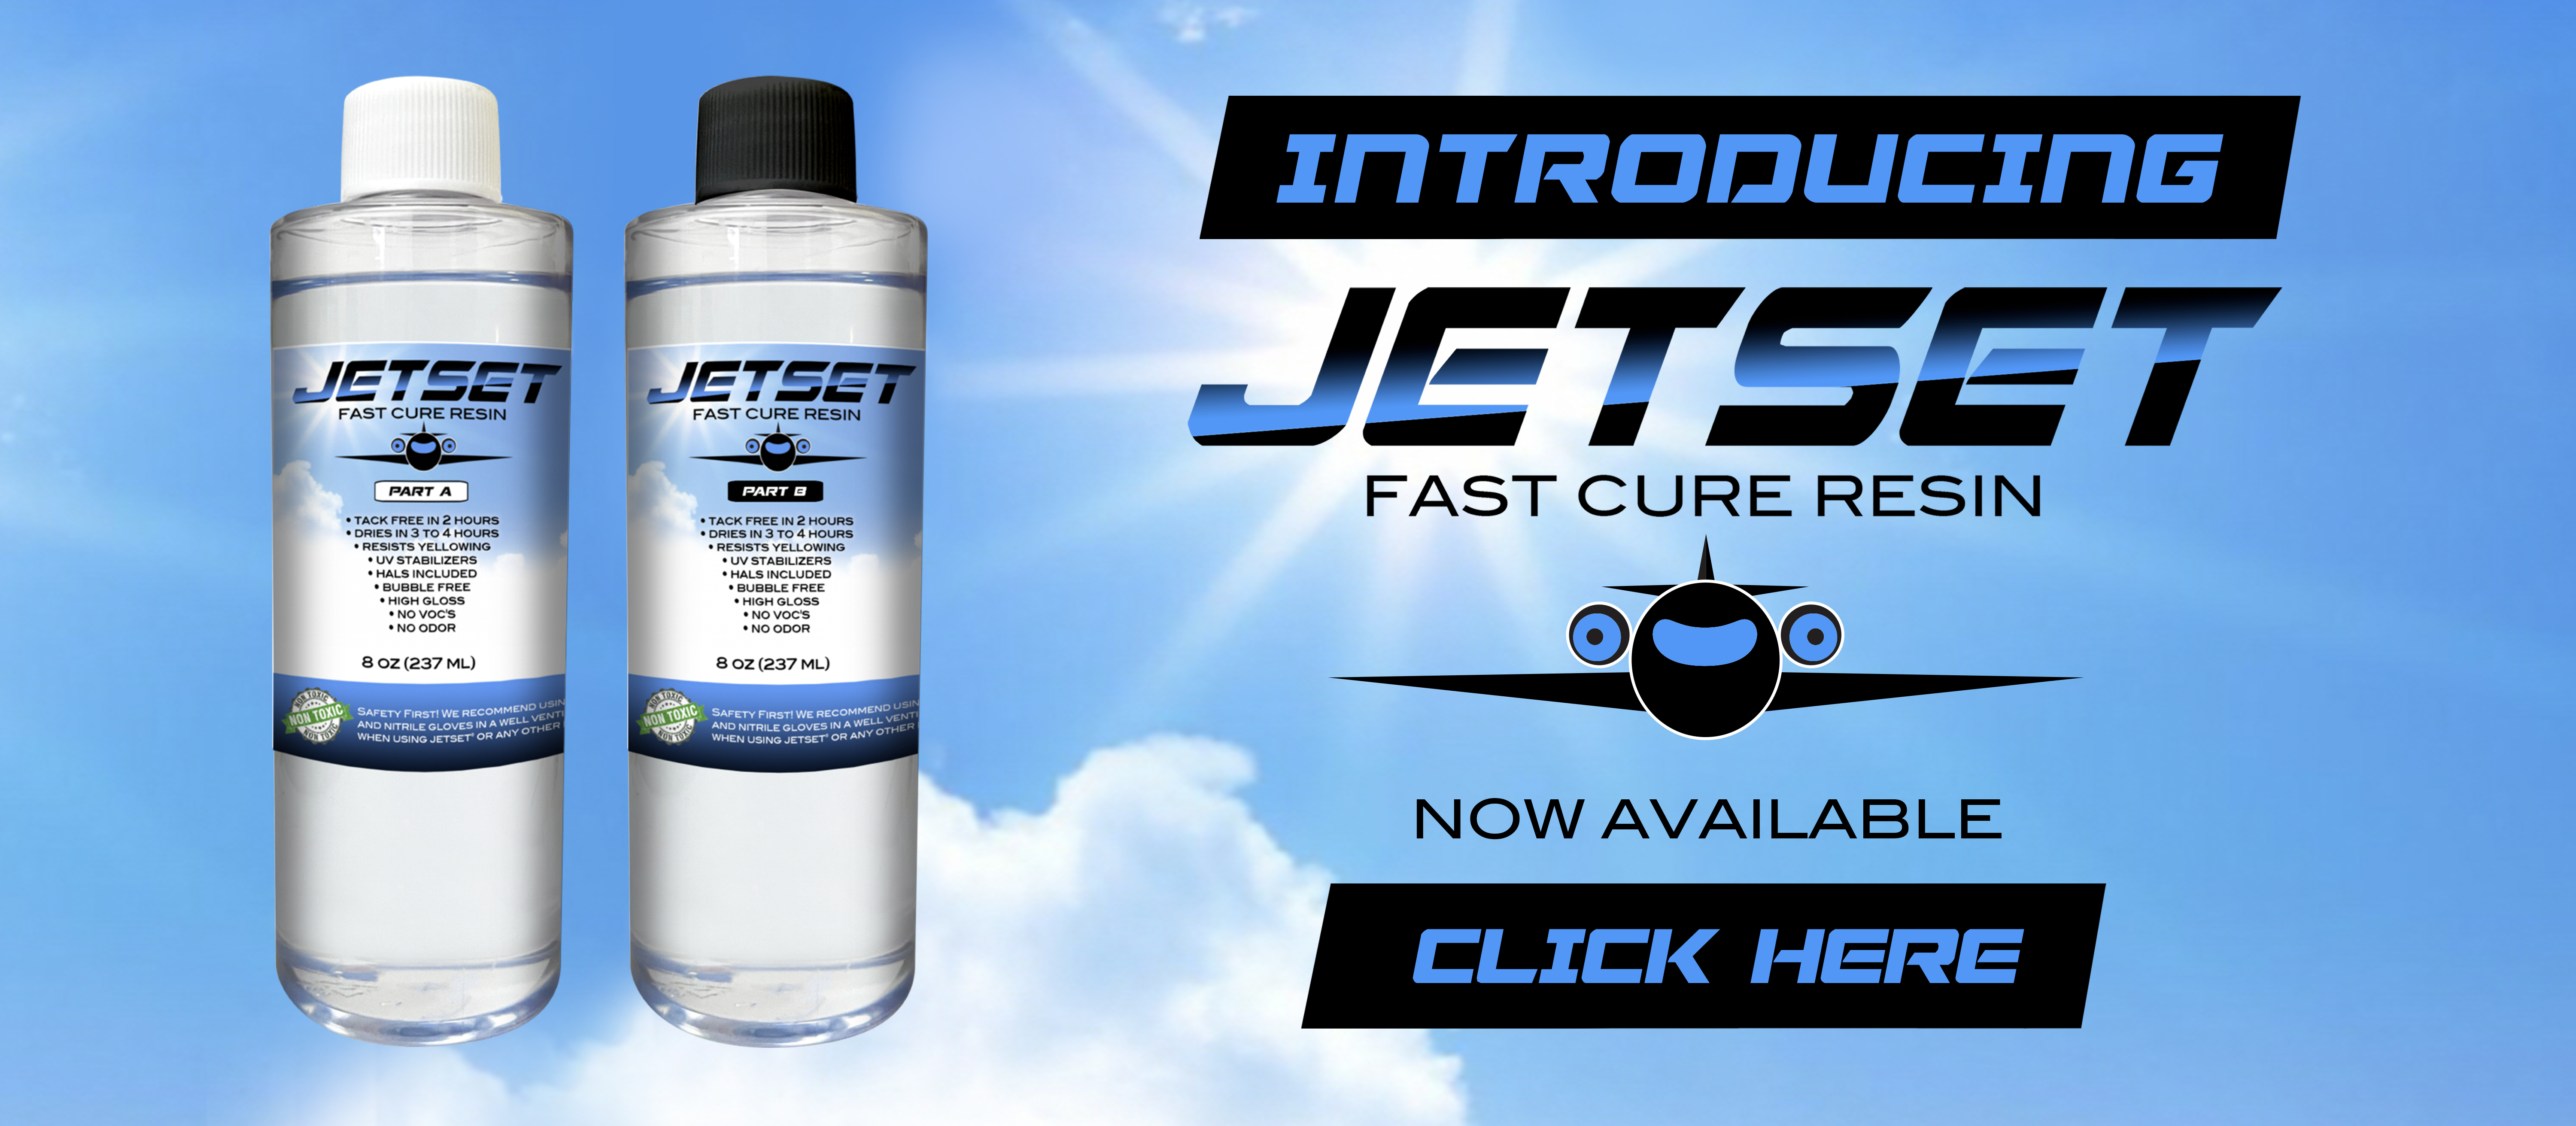 JetSet Fast Cure Quick Drying 2 part epoxy resin